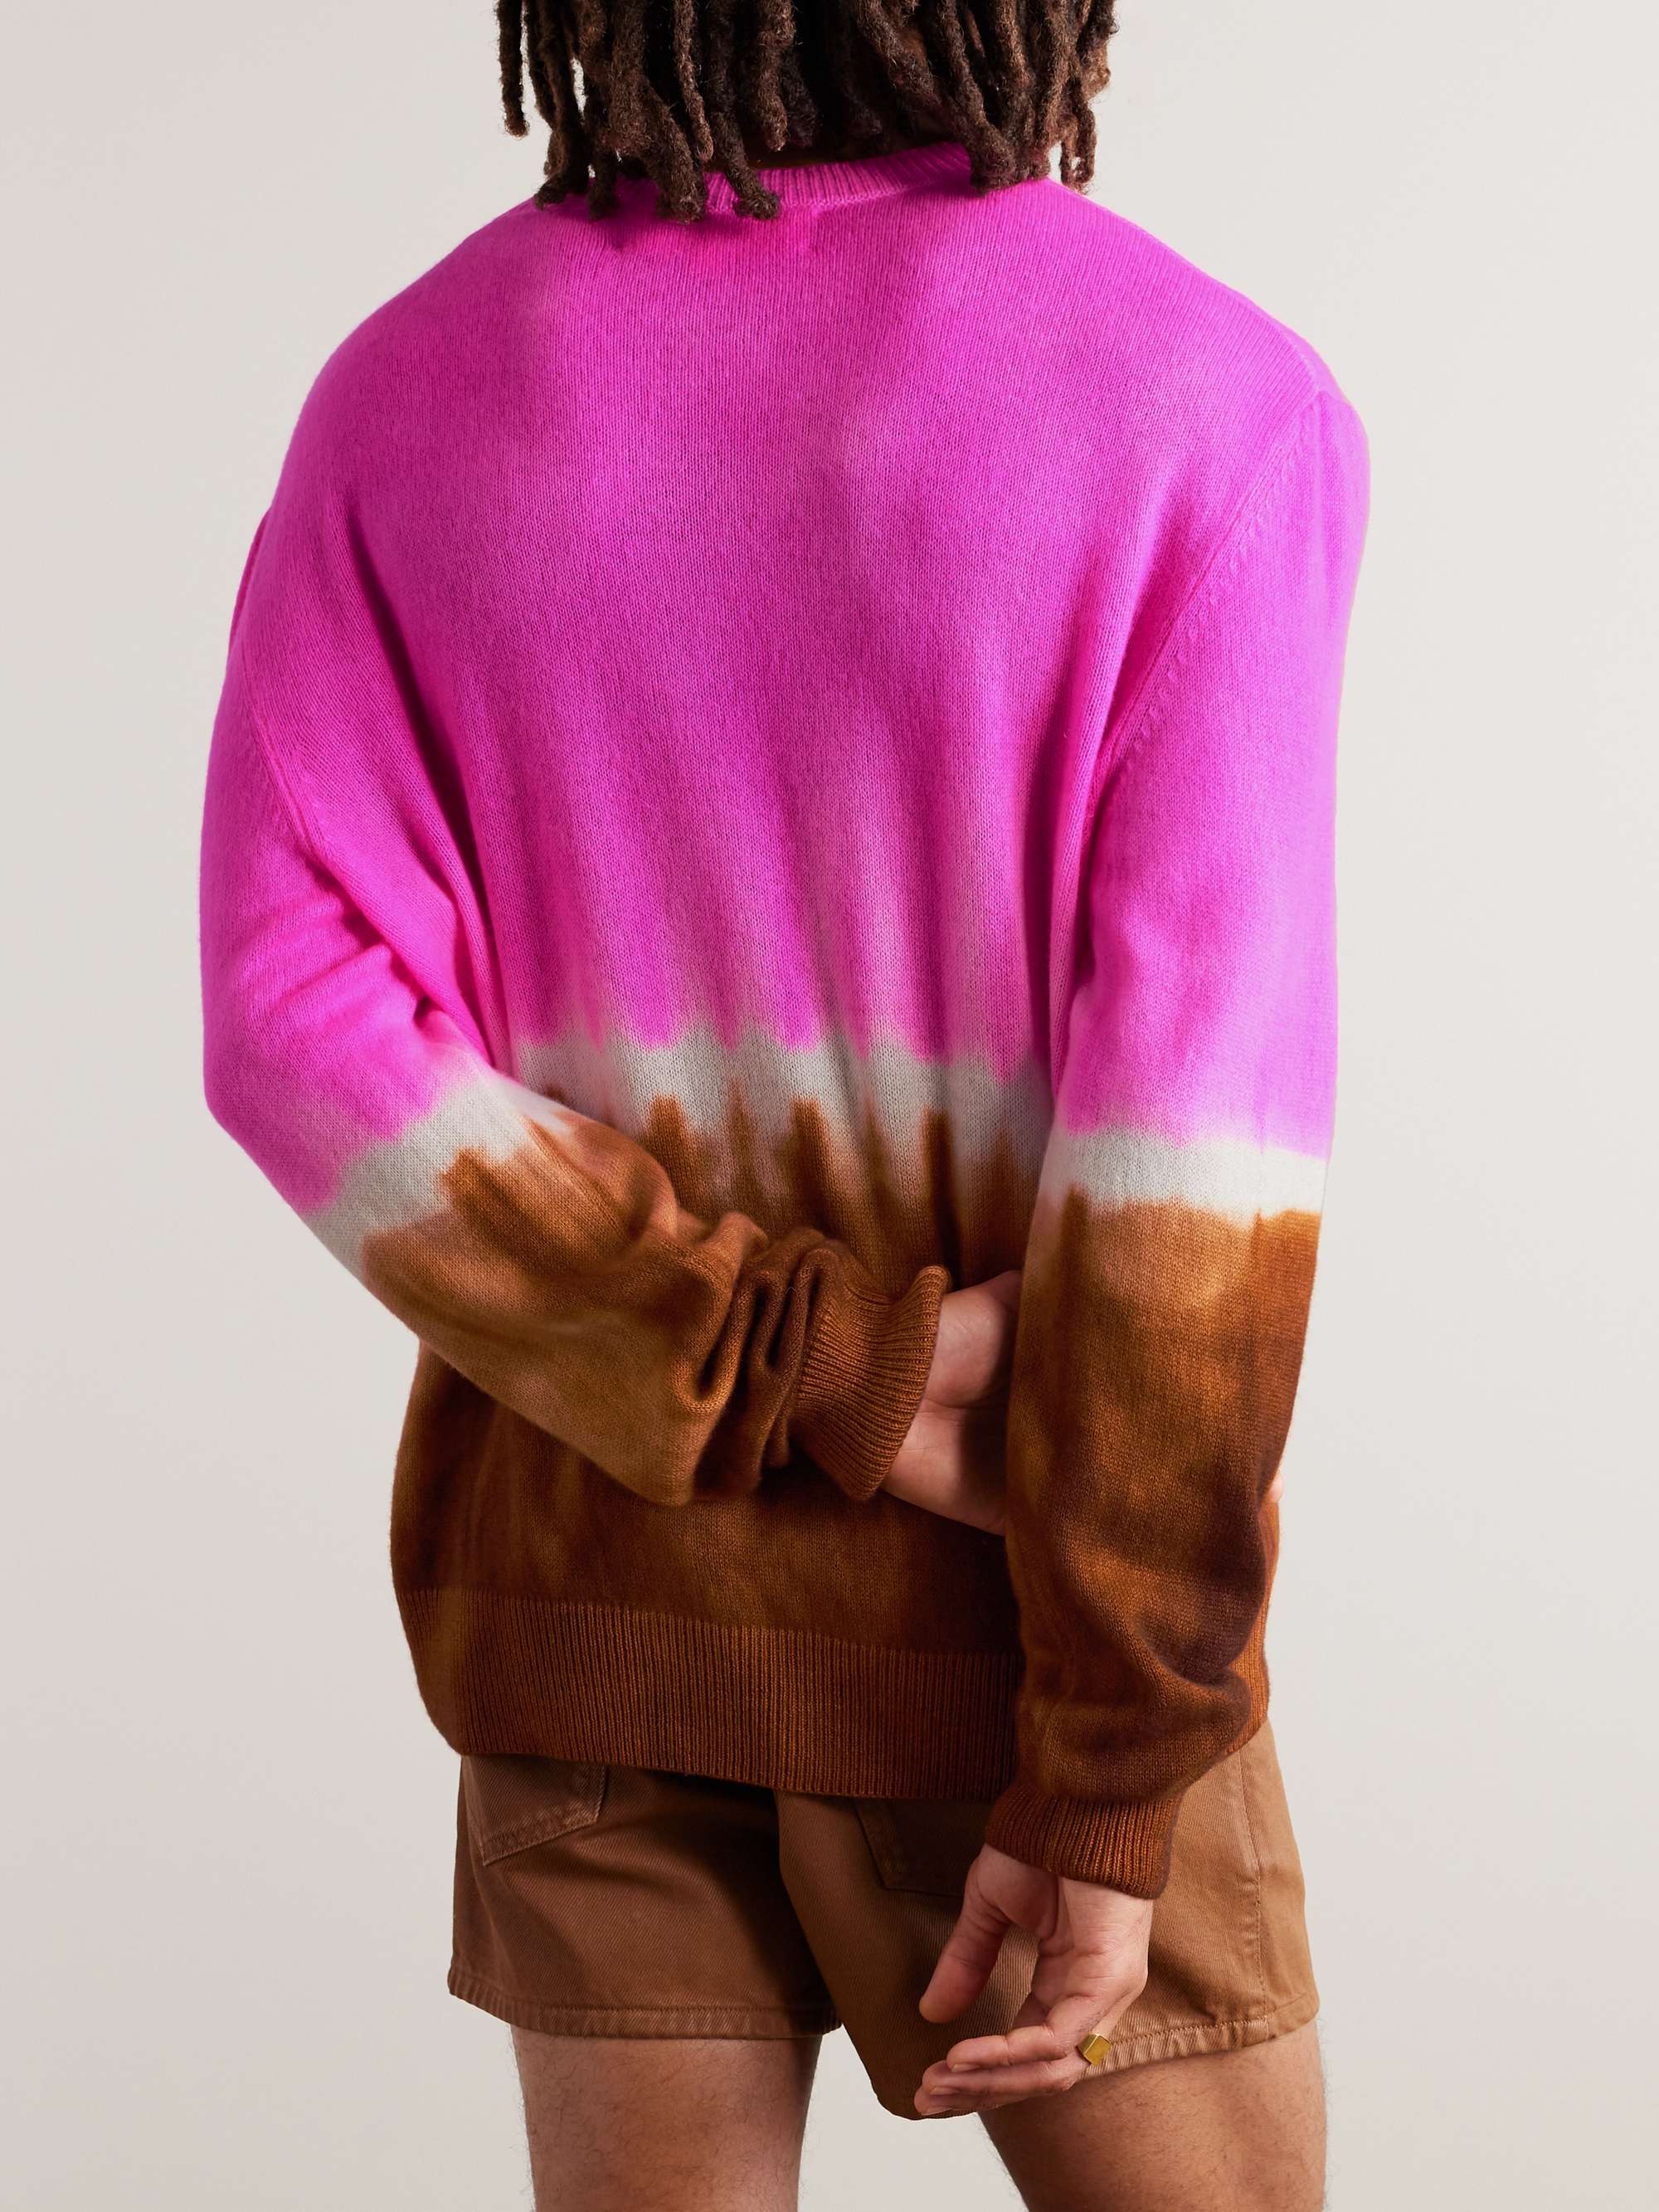 THE ELDER STATESMAN Tranquility Tie-Dyed Cashmere Sweater for Men | MR ...